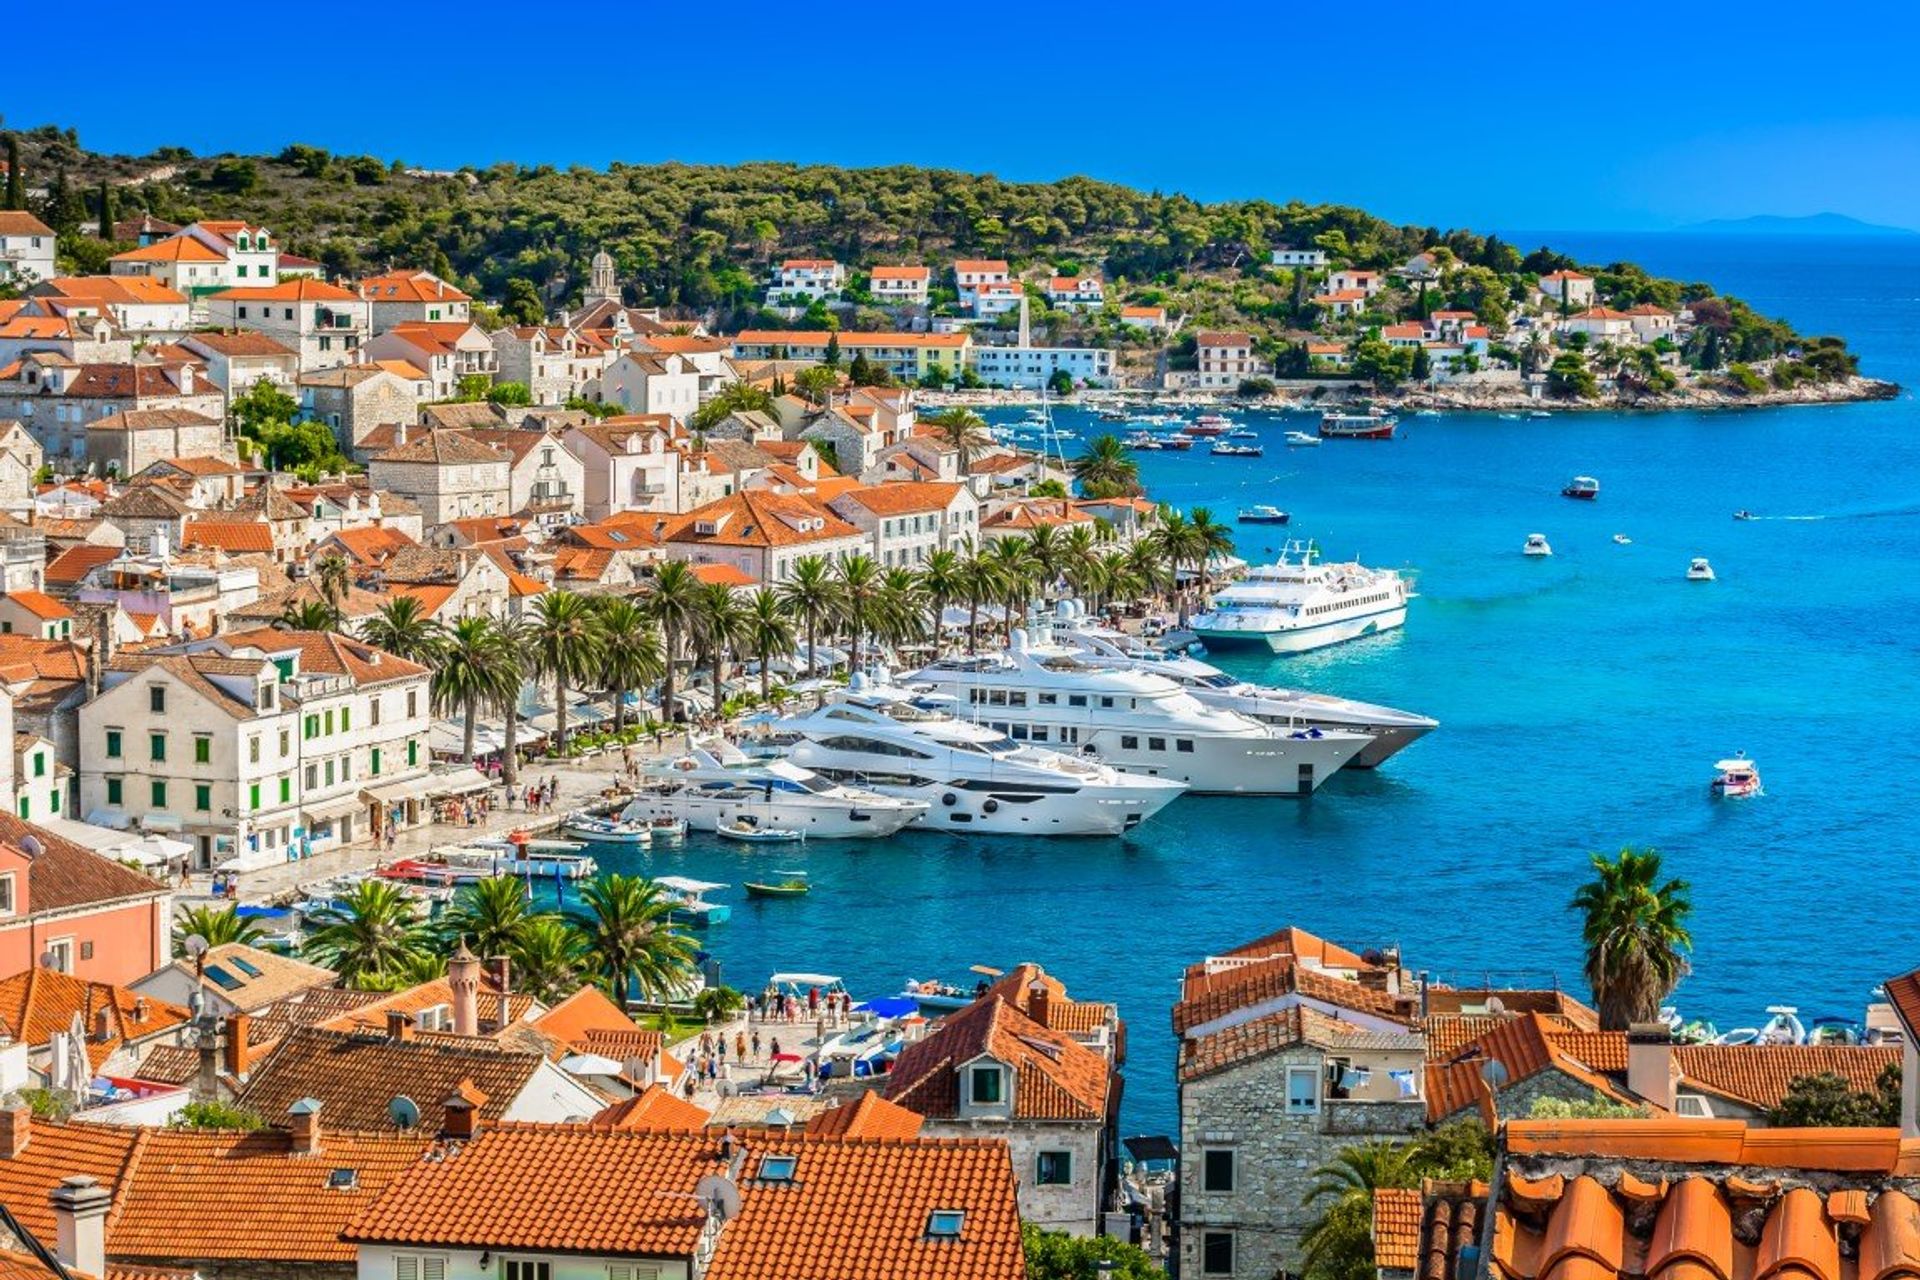 Visit Hvar town for its glamorous port, lively bars and hilltop fortress with 13th century walls